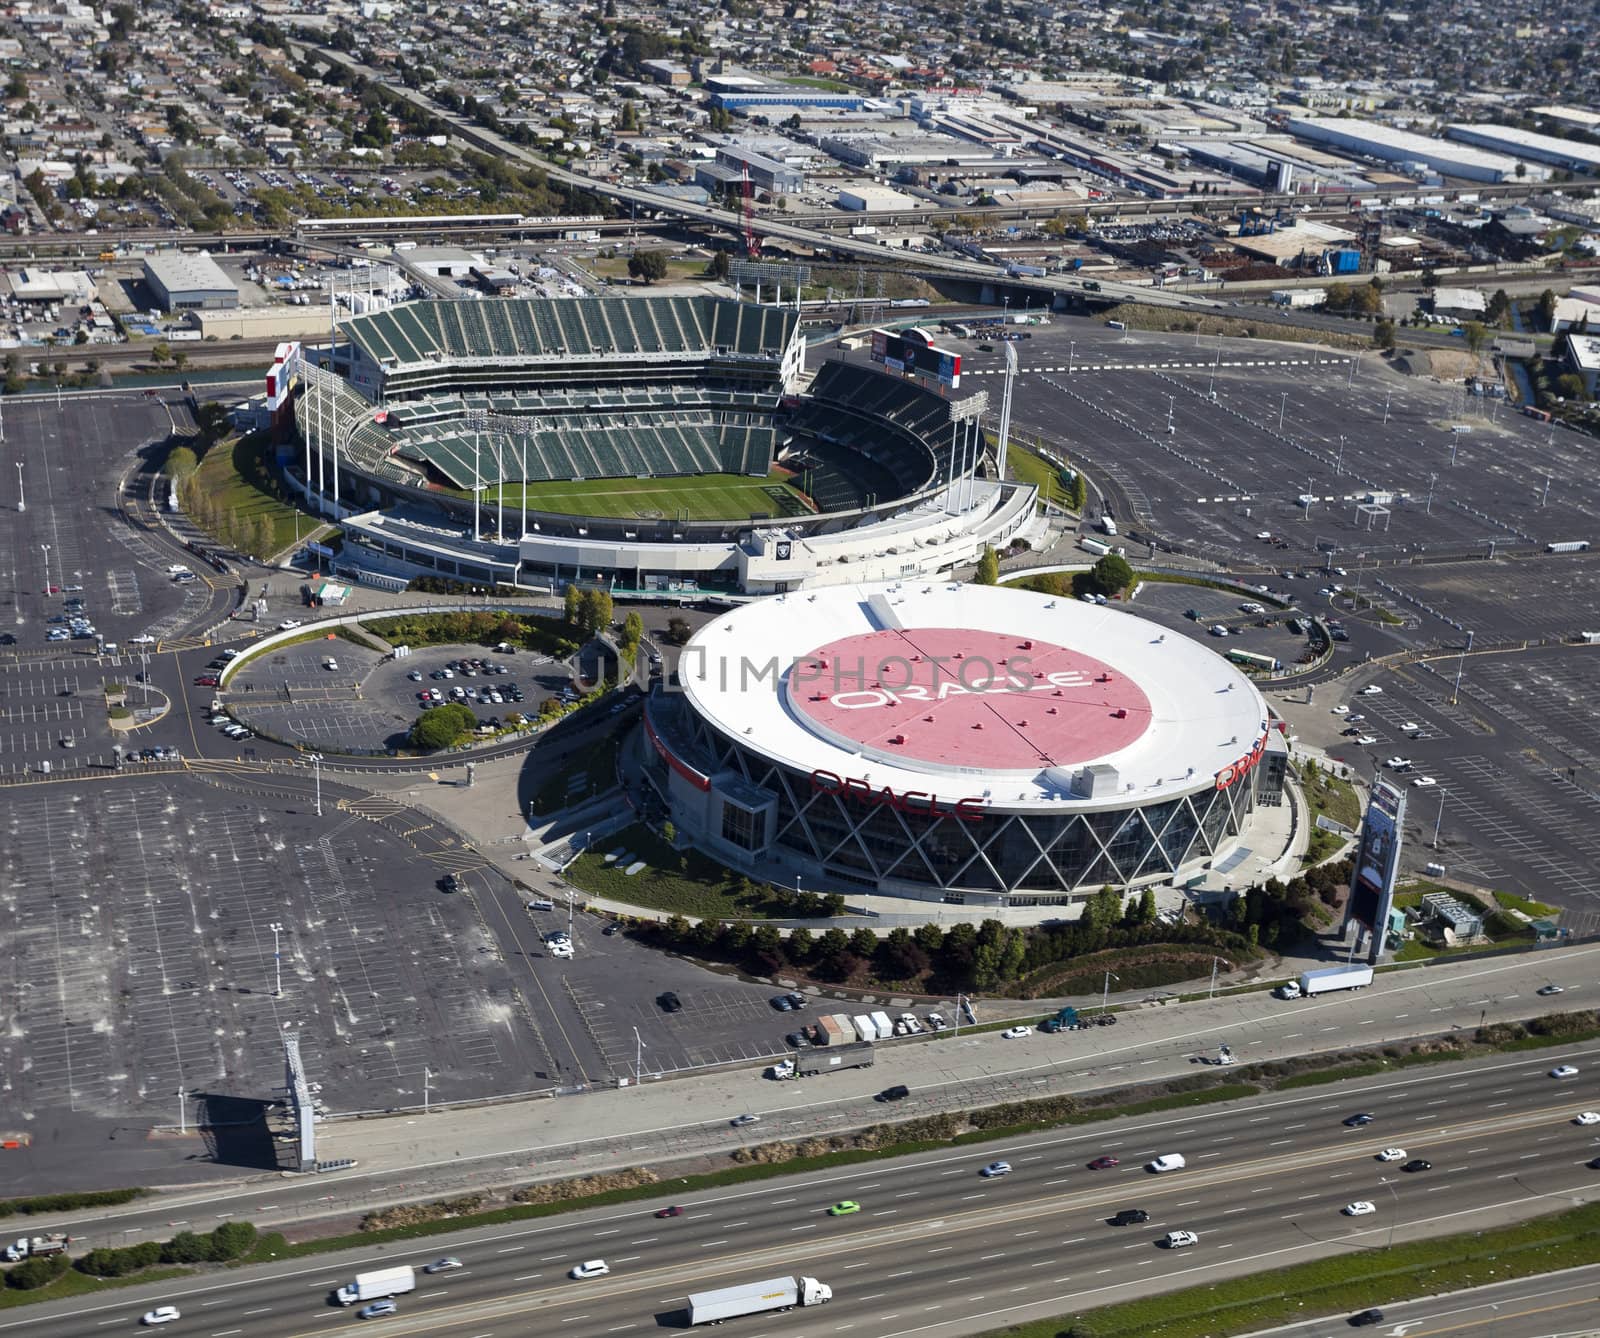 OAKLAND, CA, USA-OCTOBER 2011:Oakland-Alameda County Coliseum Arena and O.co Coliseum on October 26, 2011. It was originally constructed in 1966